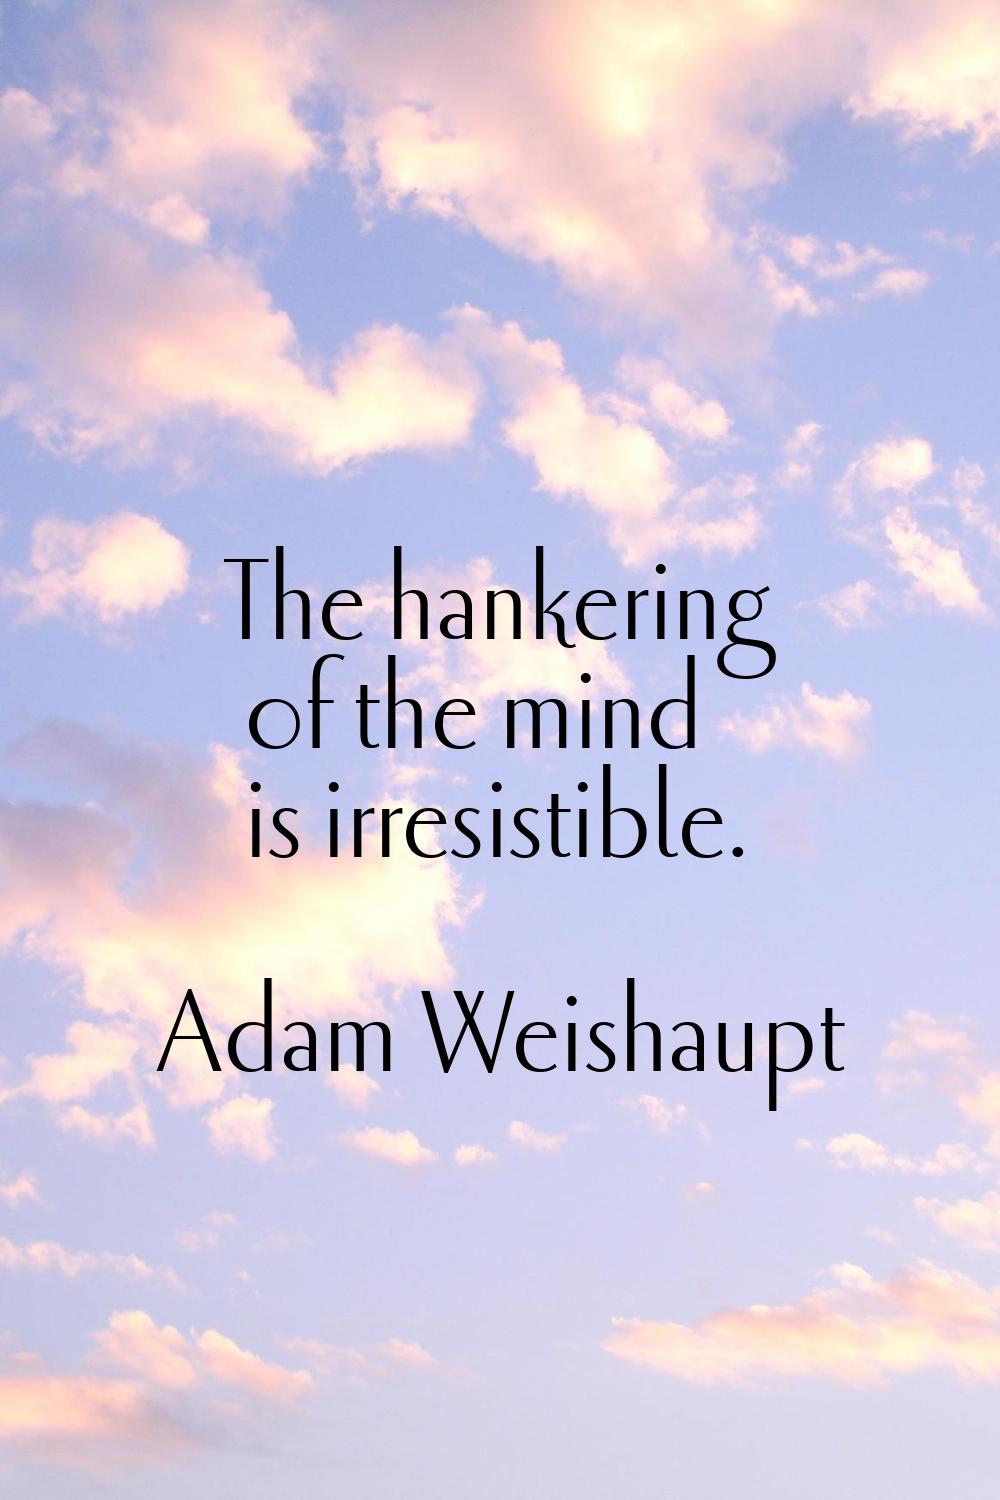 The hankering of the mind is irresistible.